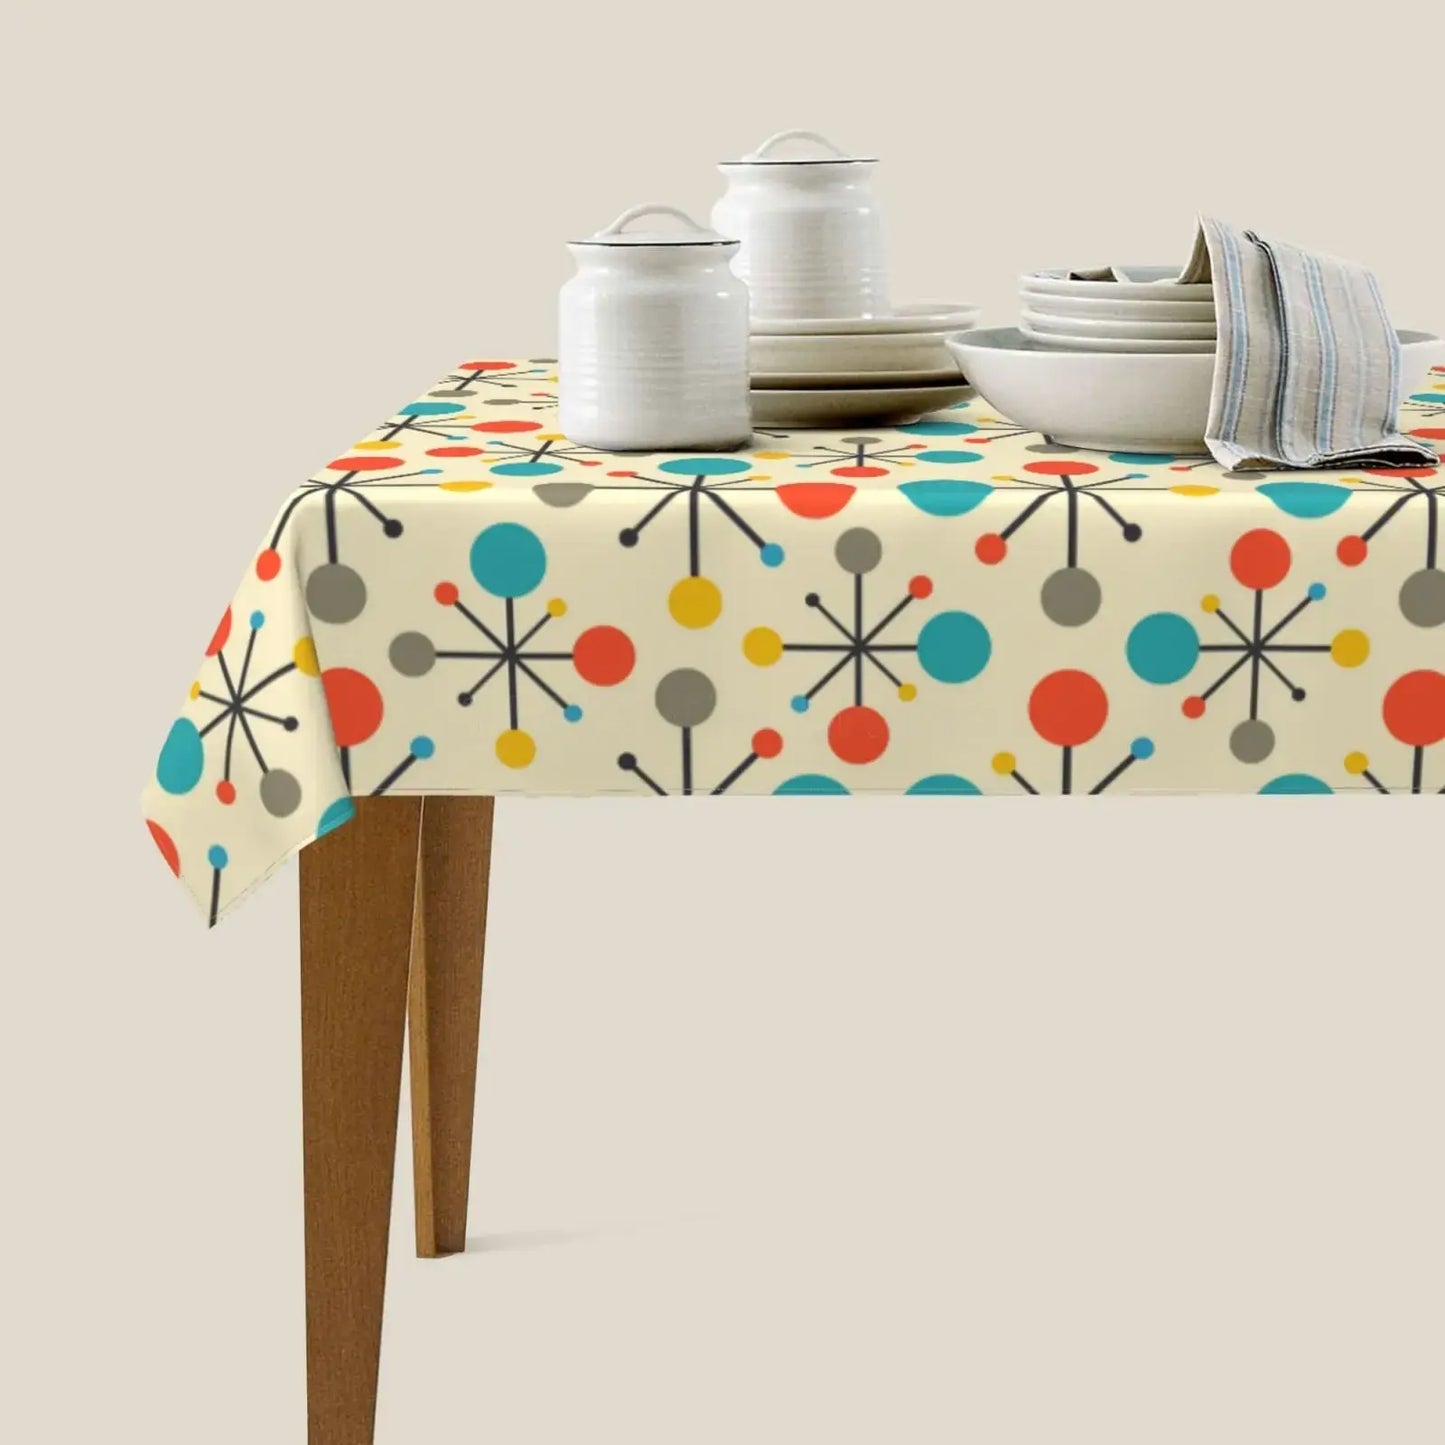 Retro 1950s Mid Century Modern Atomic Abstract Geometric TABLE CLOTH Water proof